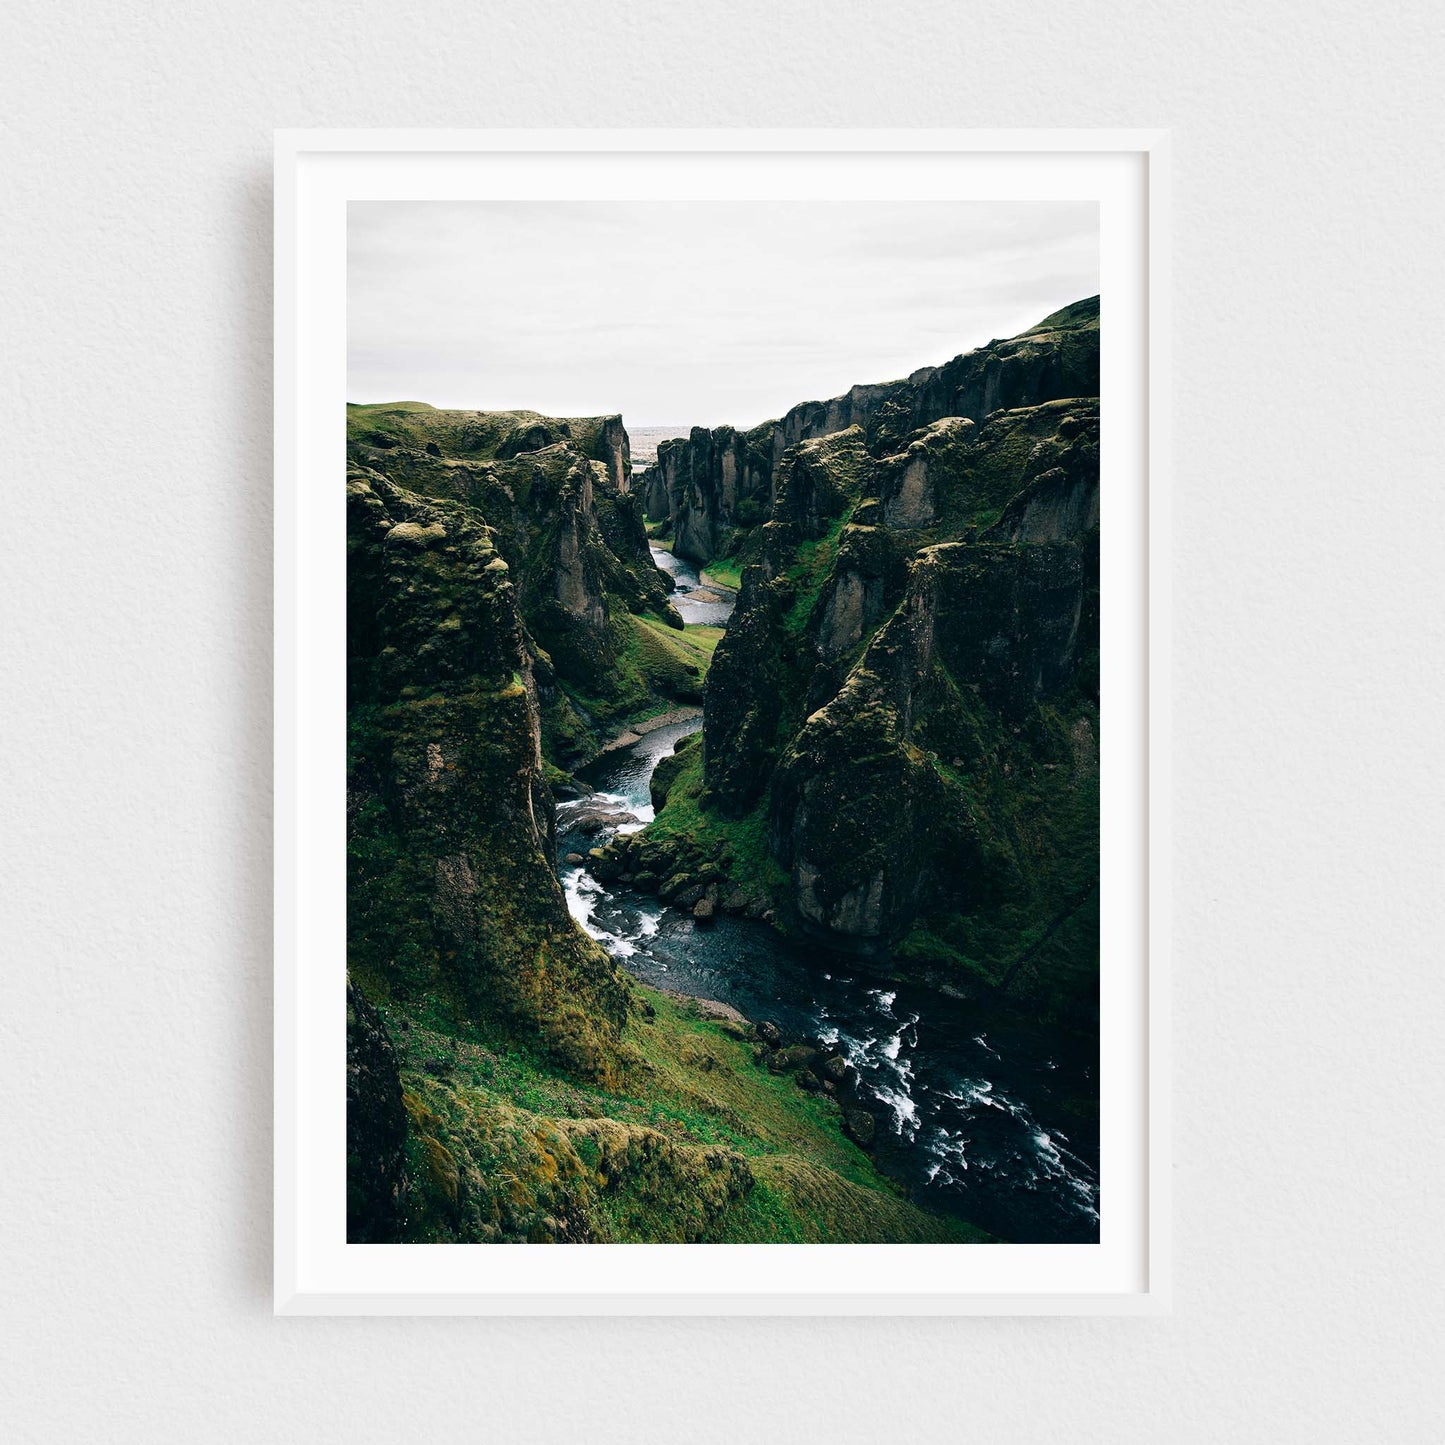 Iceland fine art photography print featuring Fjadrargljufur green canyon, in white frame